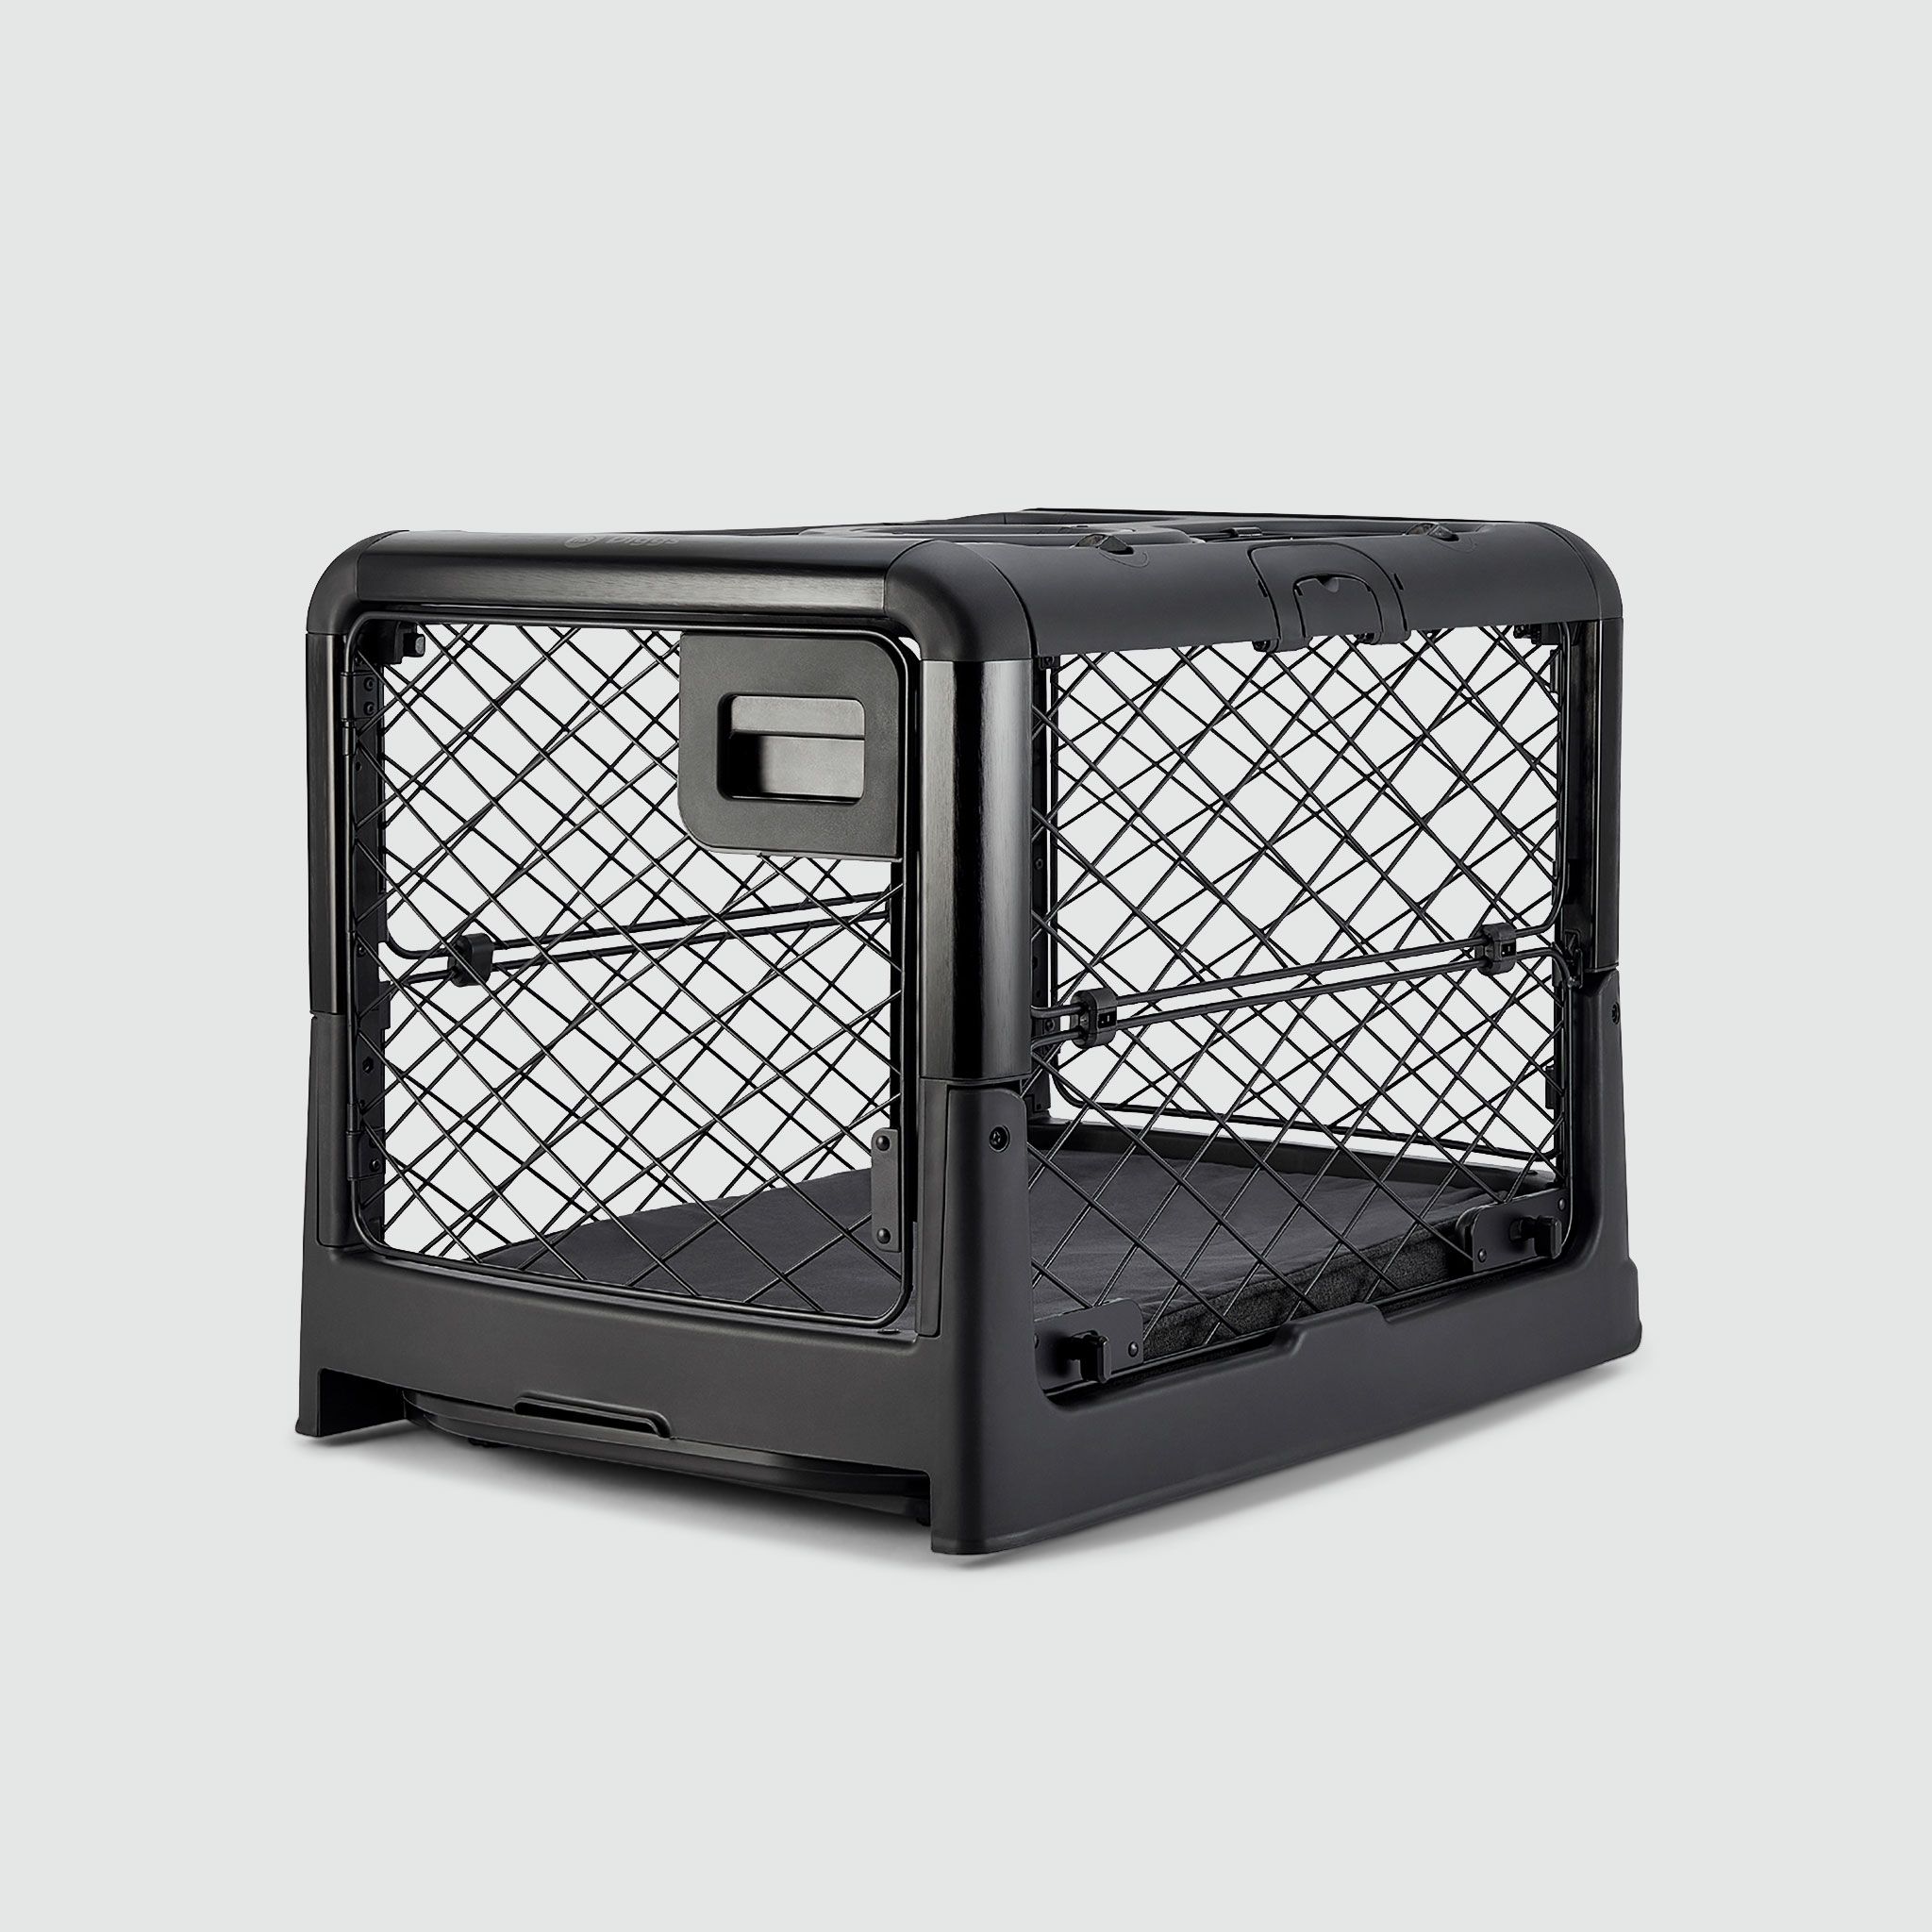 A black dog crate closed on a white background